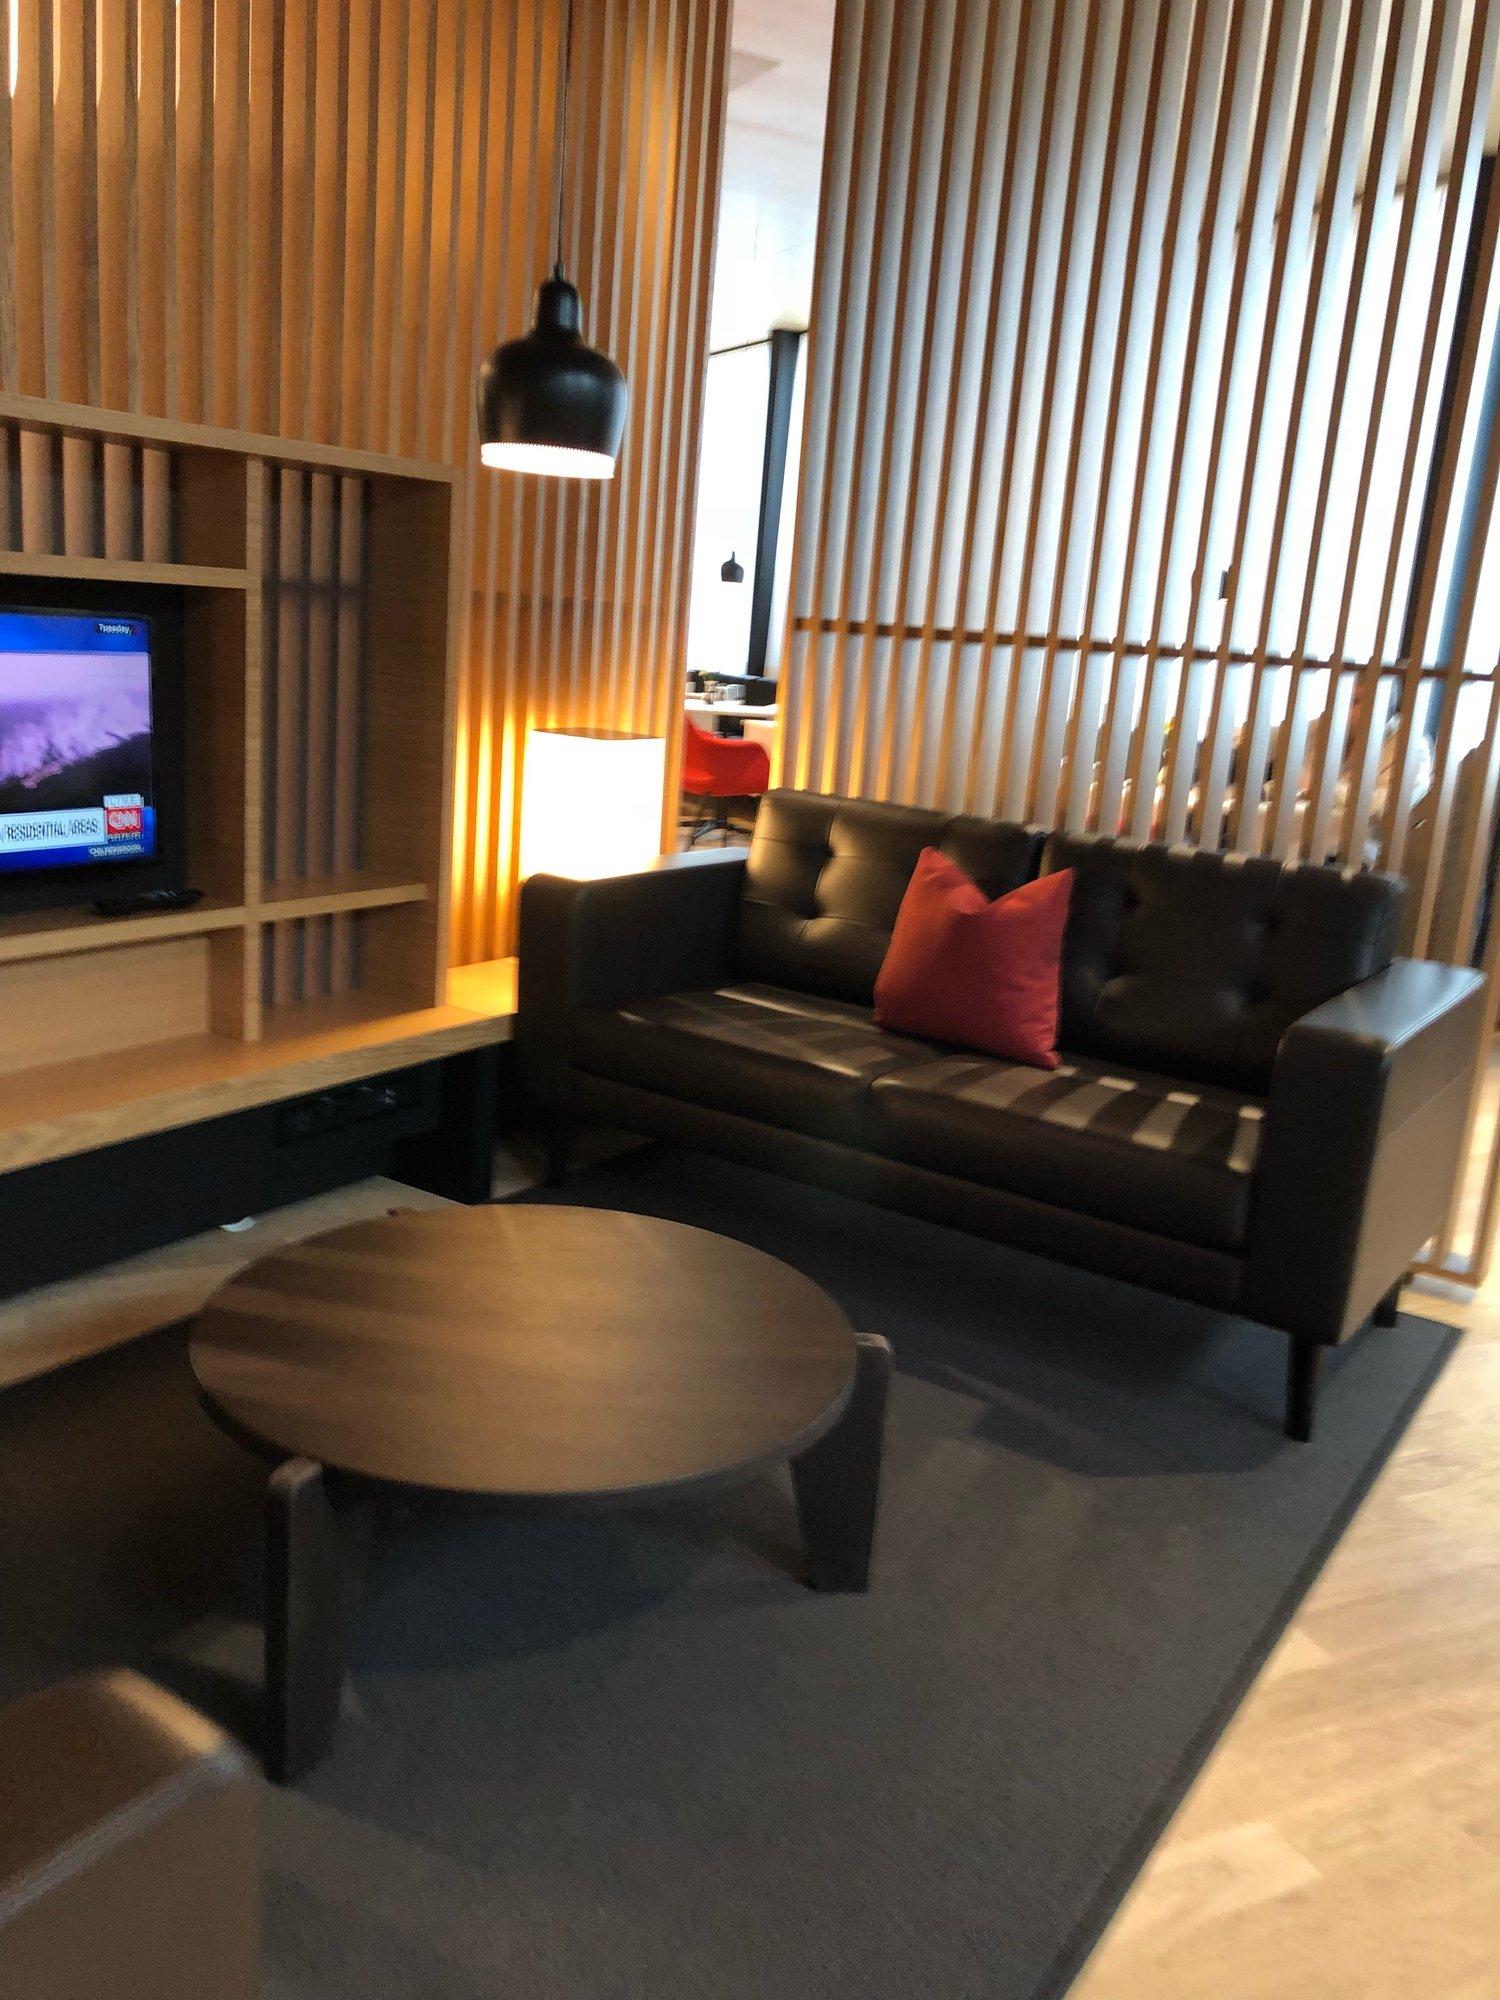 SWISS First Lounge image 4 of 5